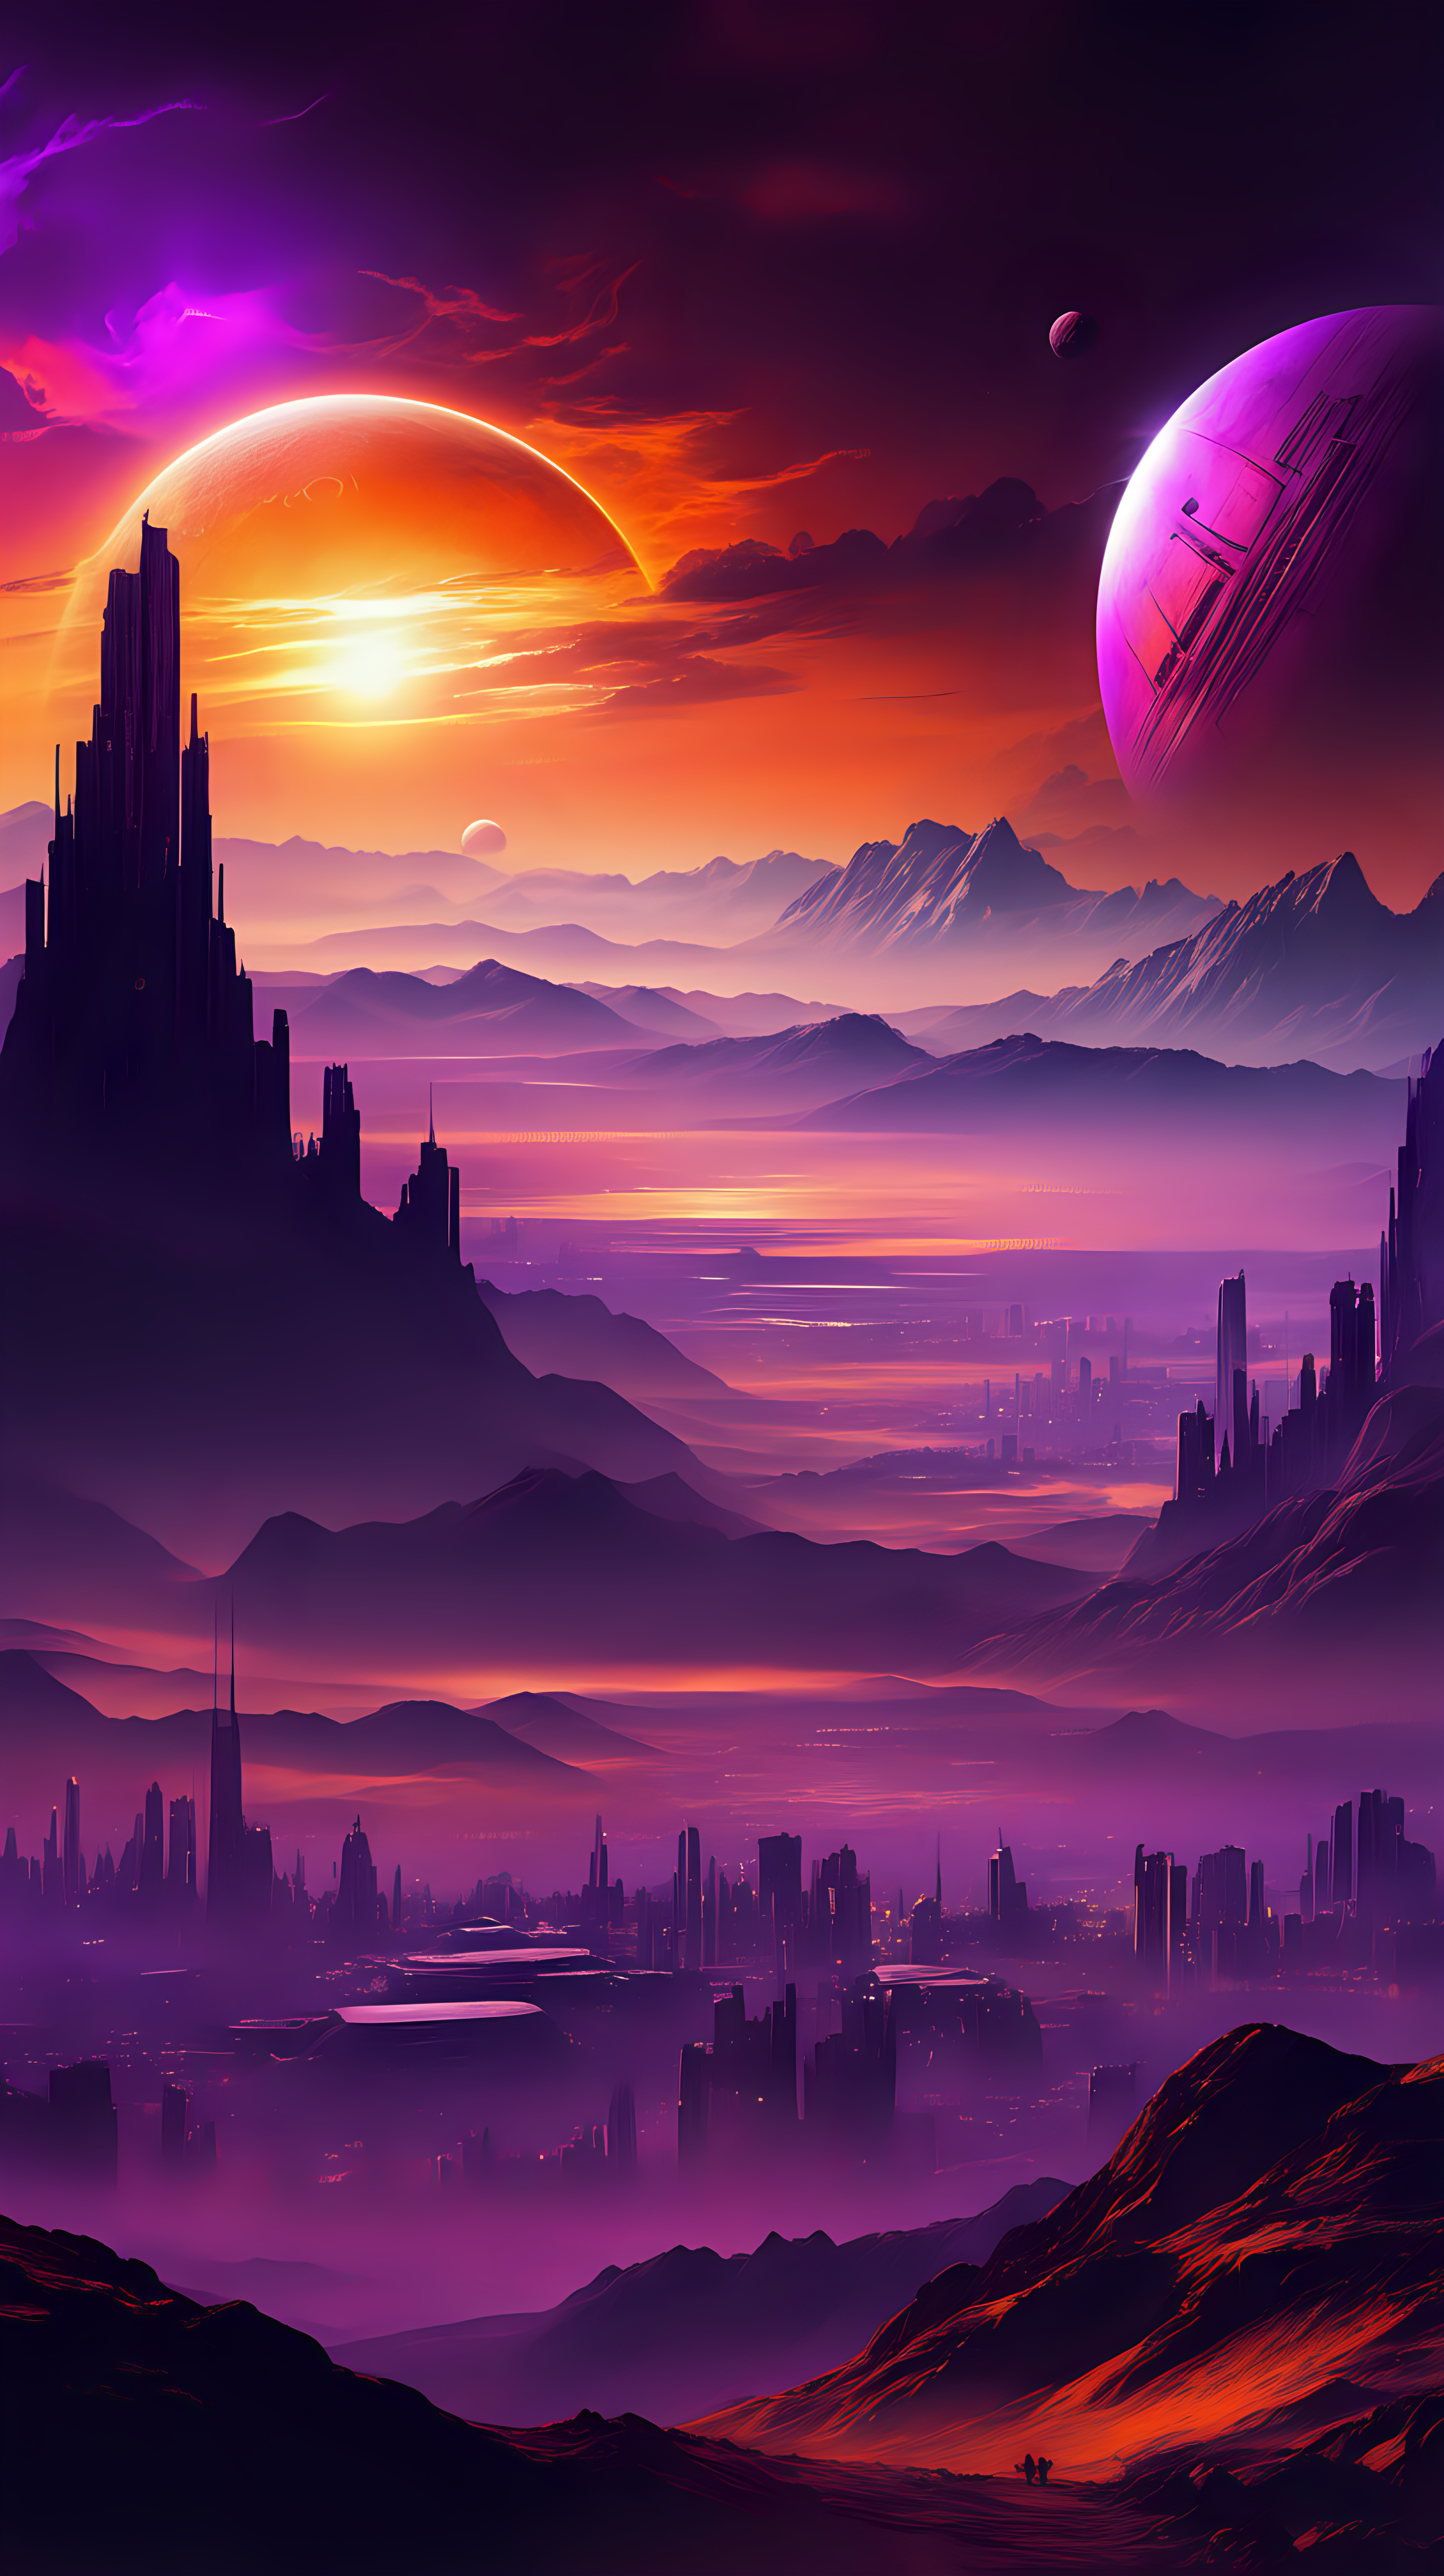 Make a fantastic fantasy and scifi picture with